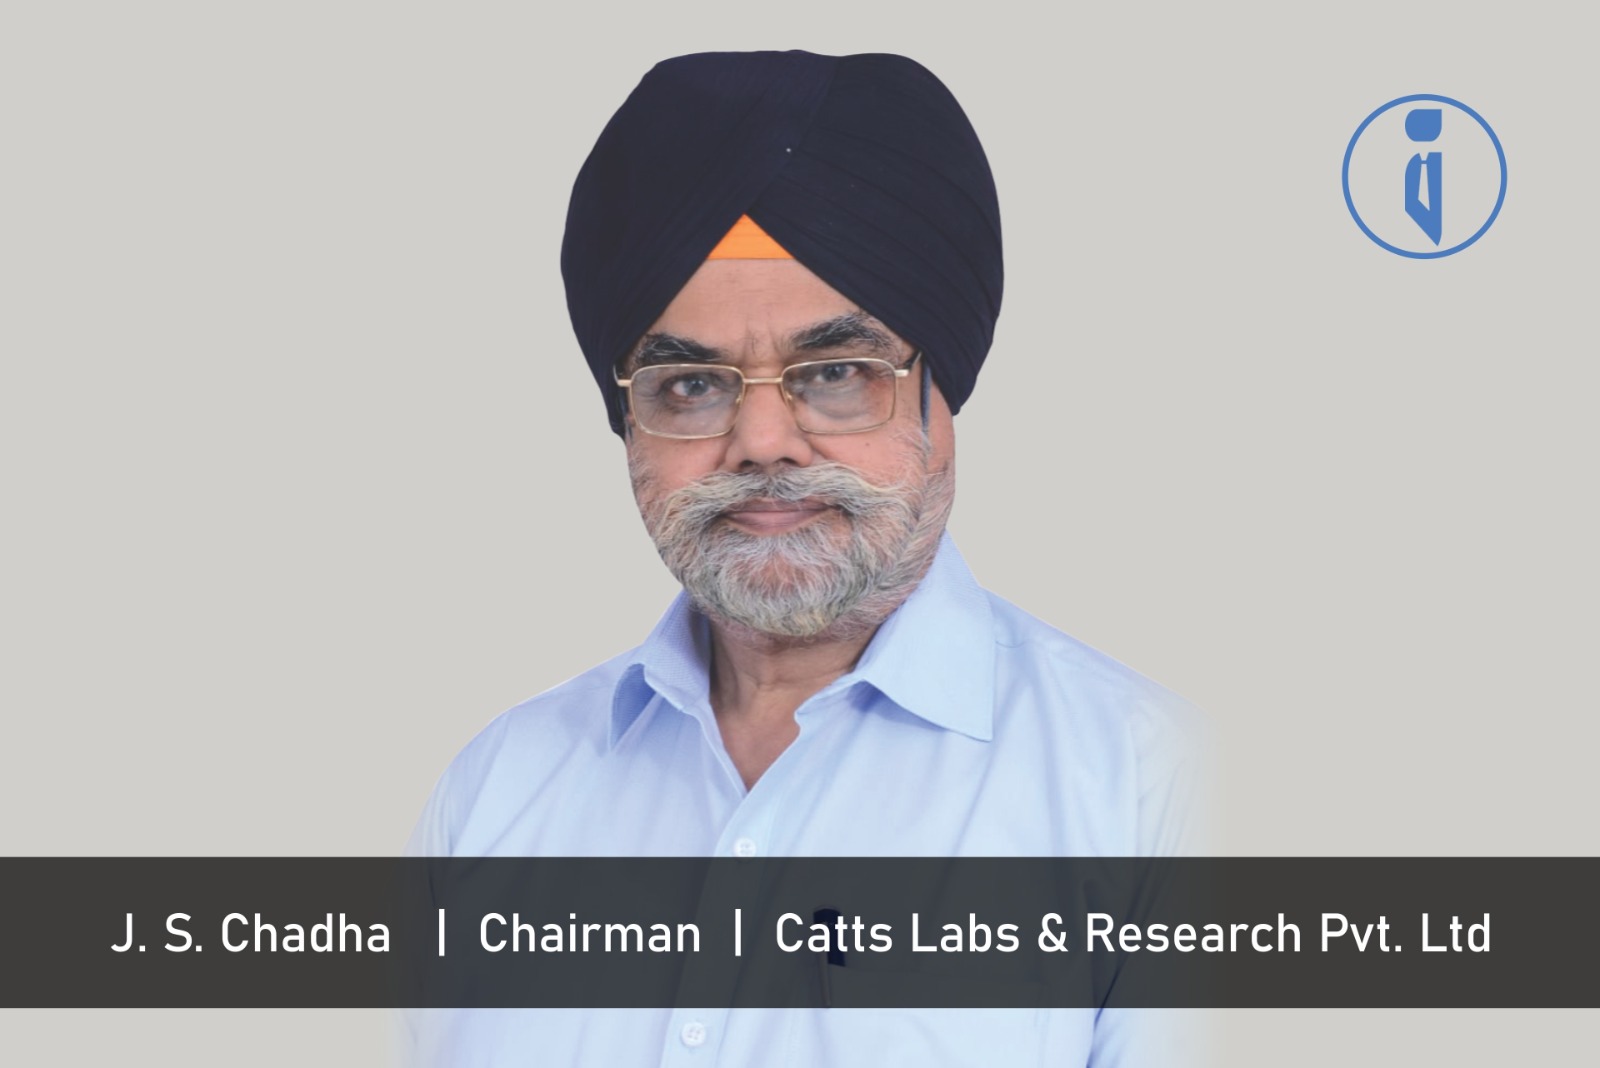 JS Chadha - Chairman - Catts Labs & Research Pvt.Ltd | Business Iconic